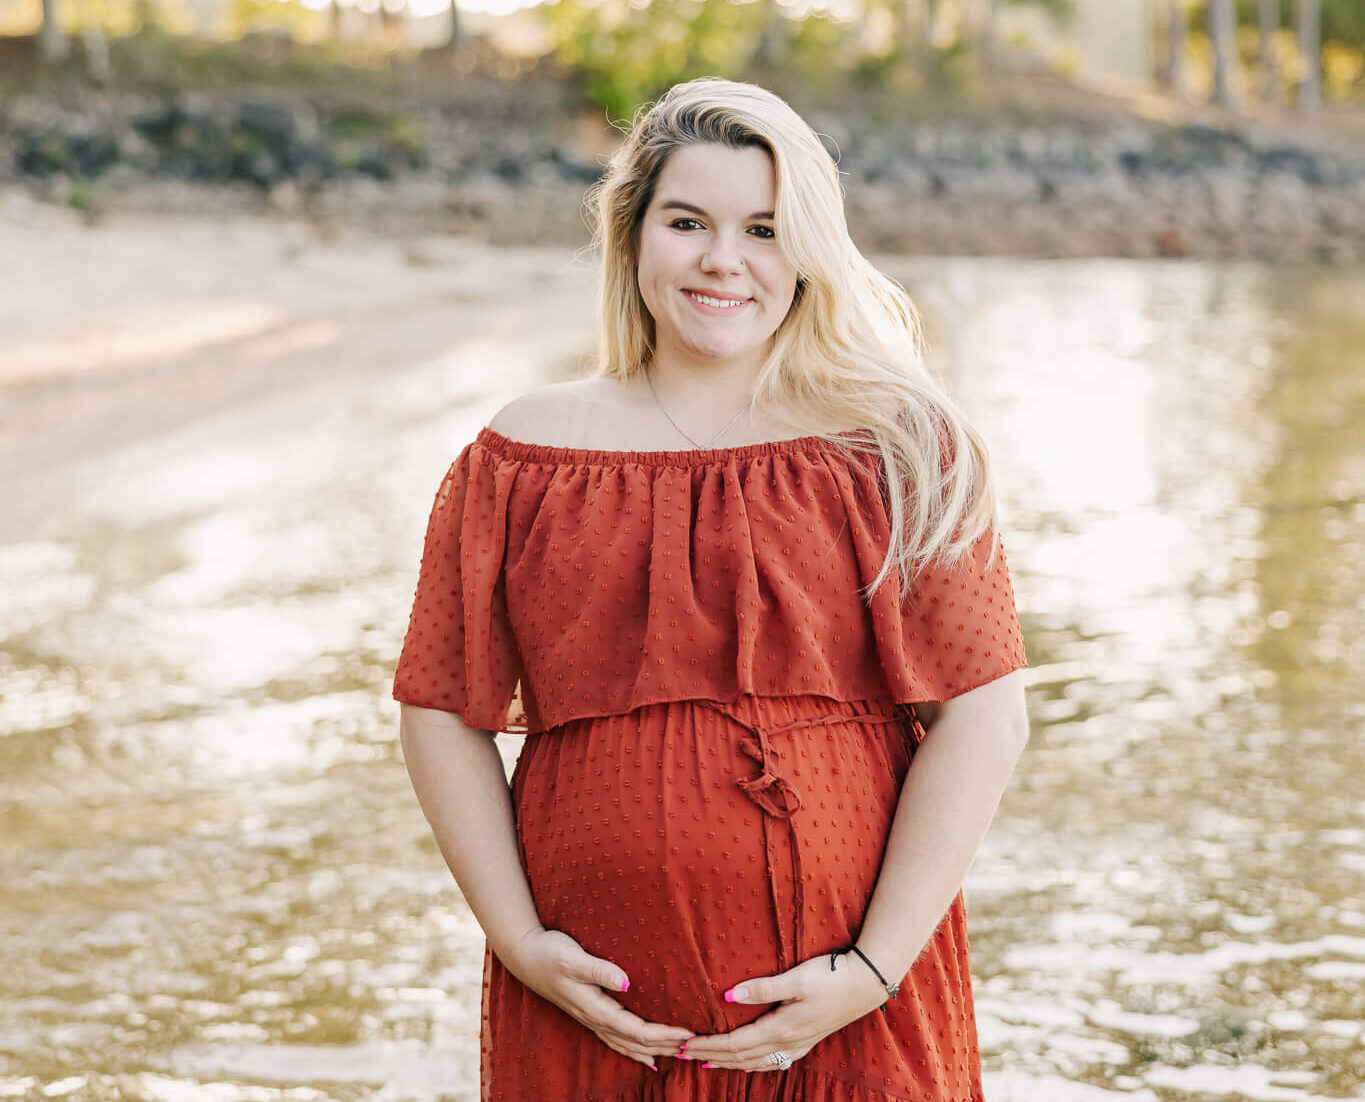 Pregnant mom holding her belly during her maternity session. Mom is wearing a rustic baltic born dress from my client closet.